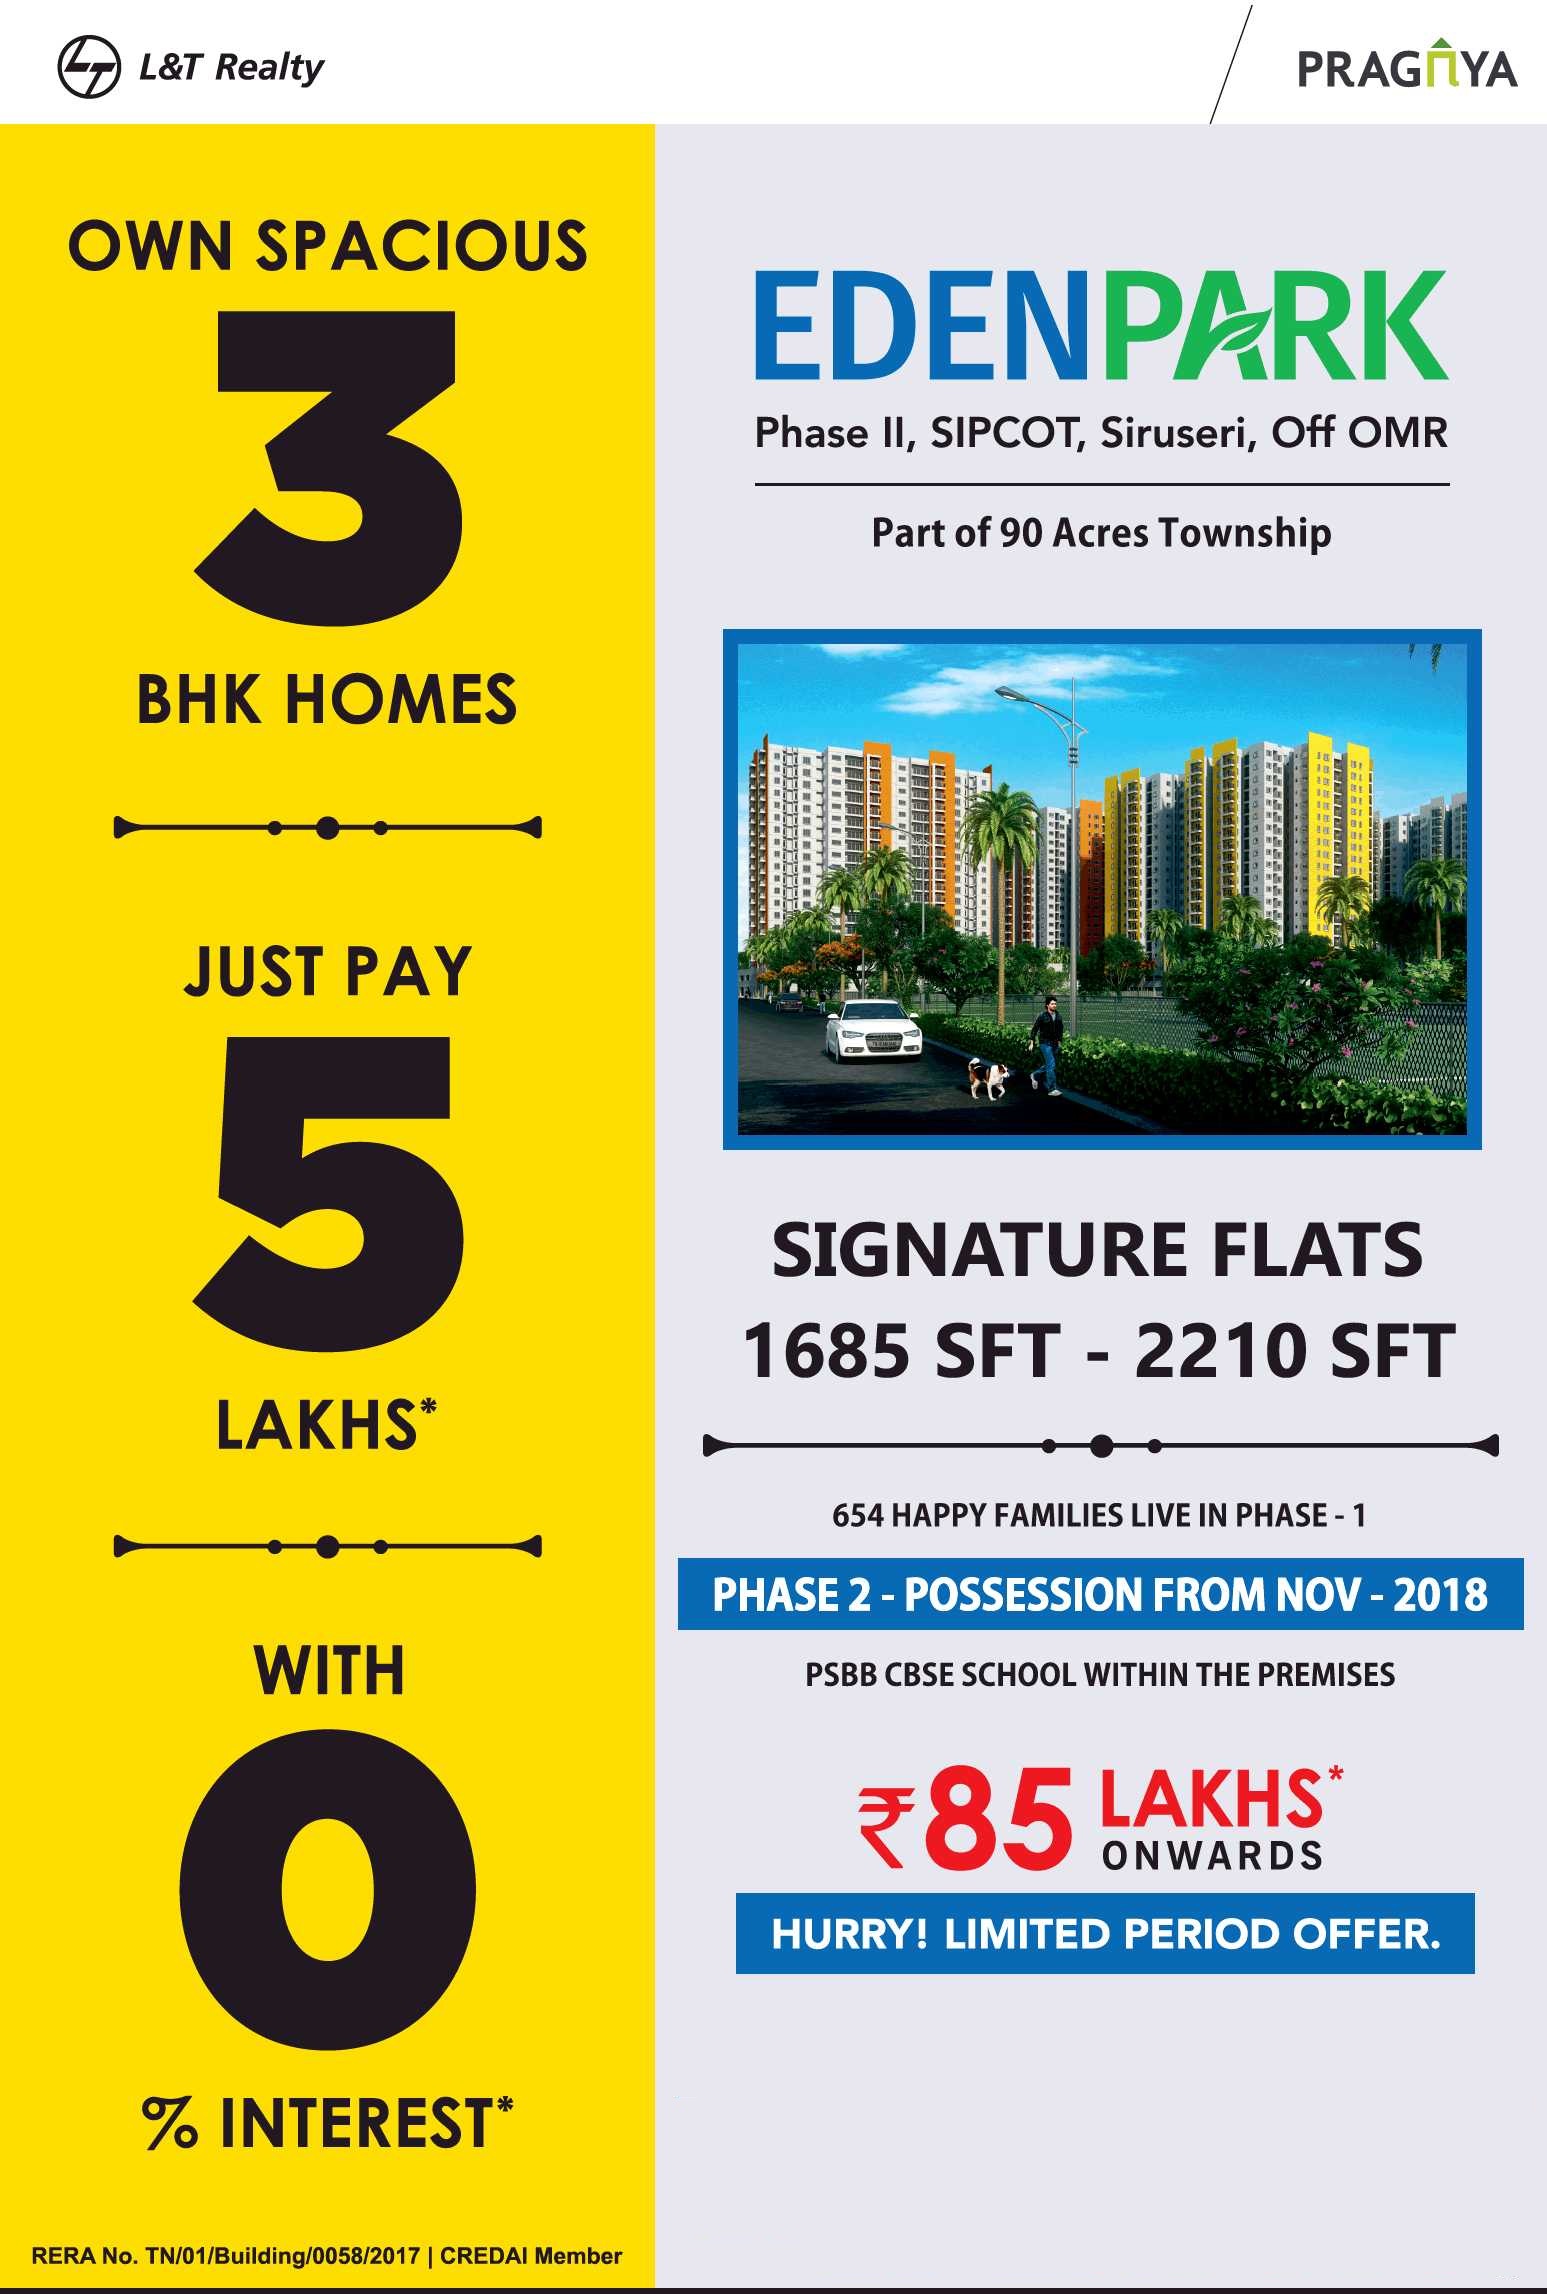 Book own spacious 3 bhk homes at L & T Eden Park in  Chennai Update